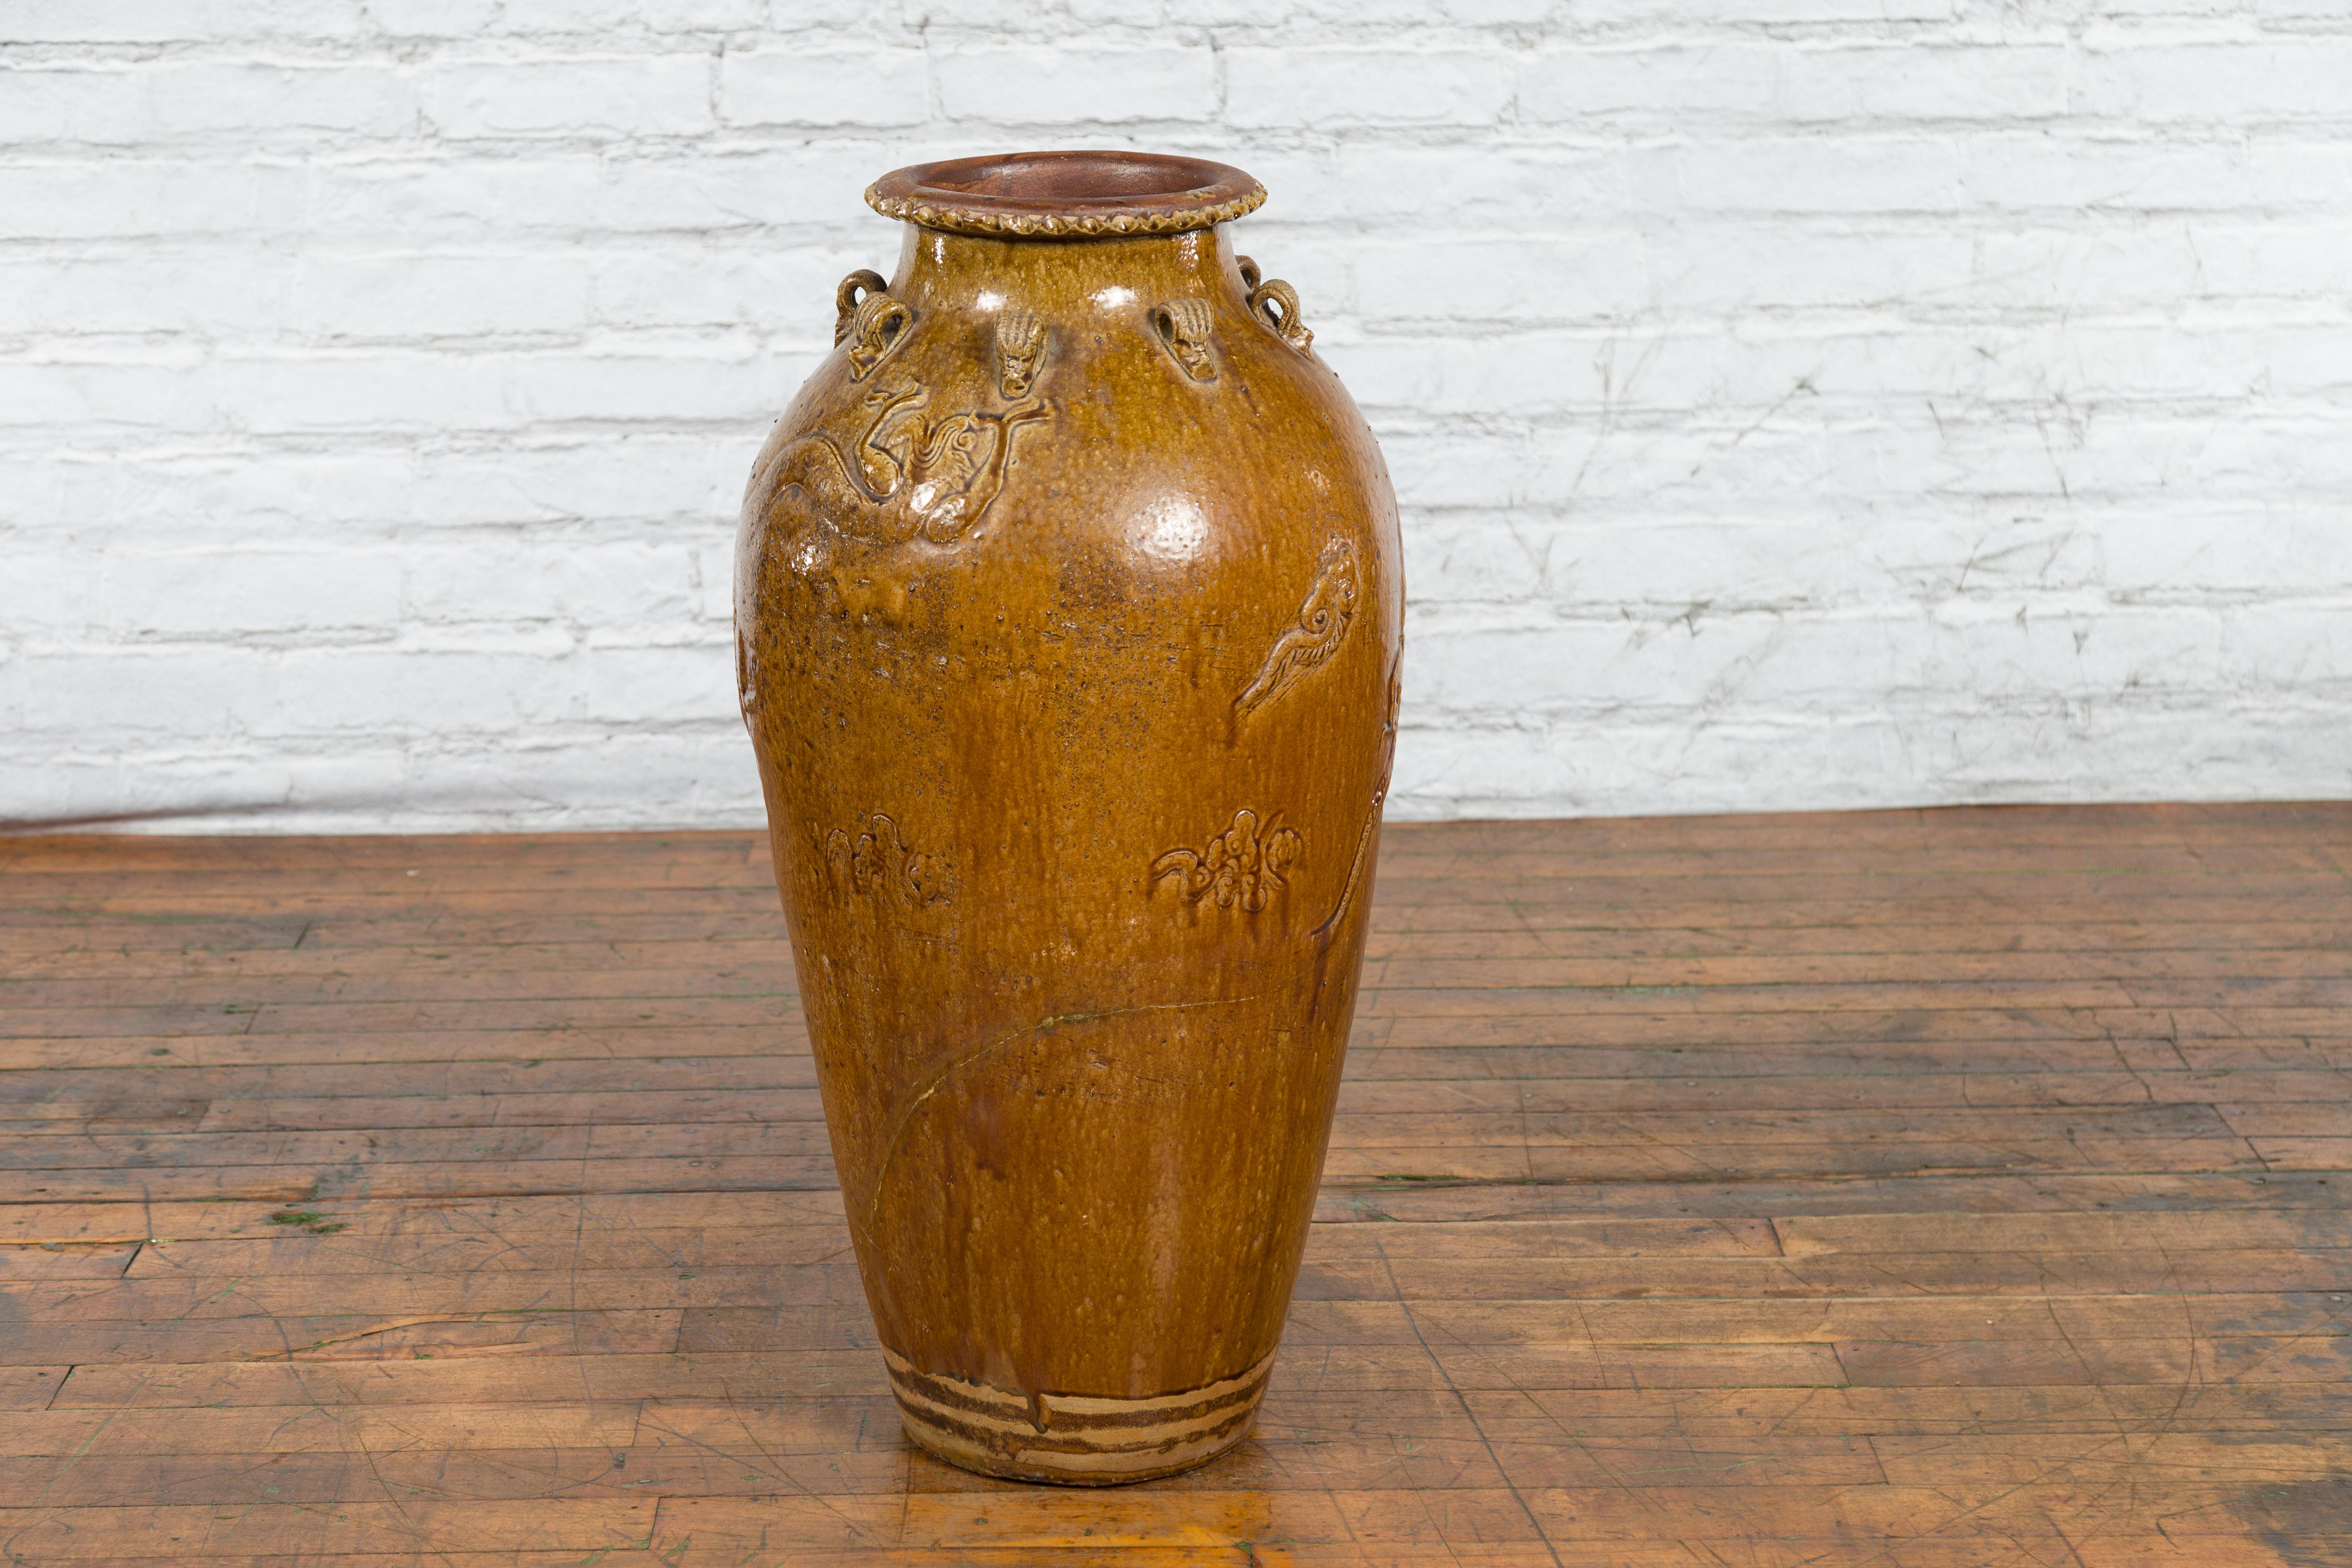 Tall Antique Qing Dynasty Period Martaban Jar from China, 18th-19th Century For Sale 6